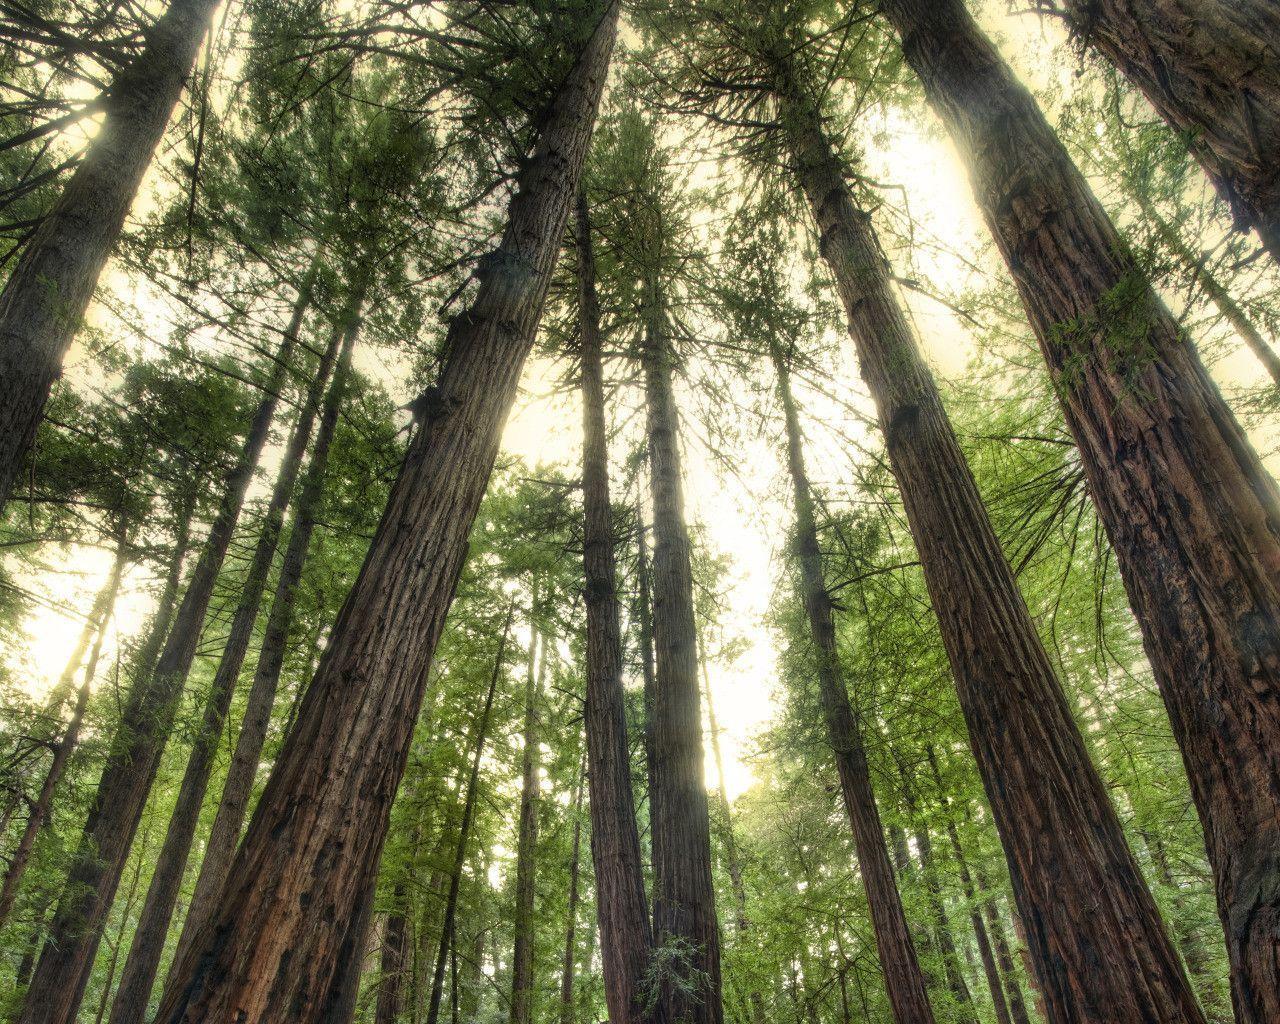 The Giants in the Muir Woods widescreen wallpaper. Wide